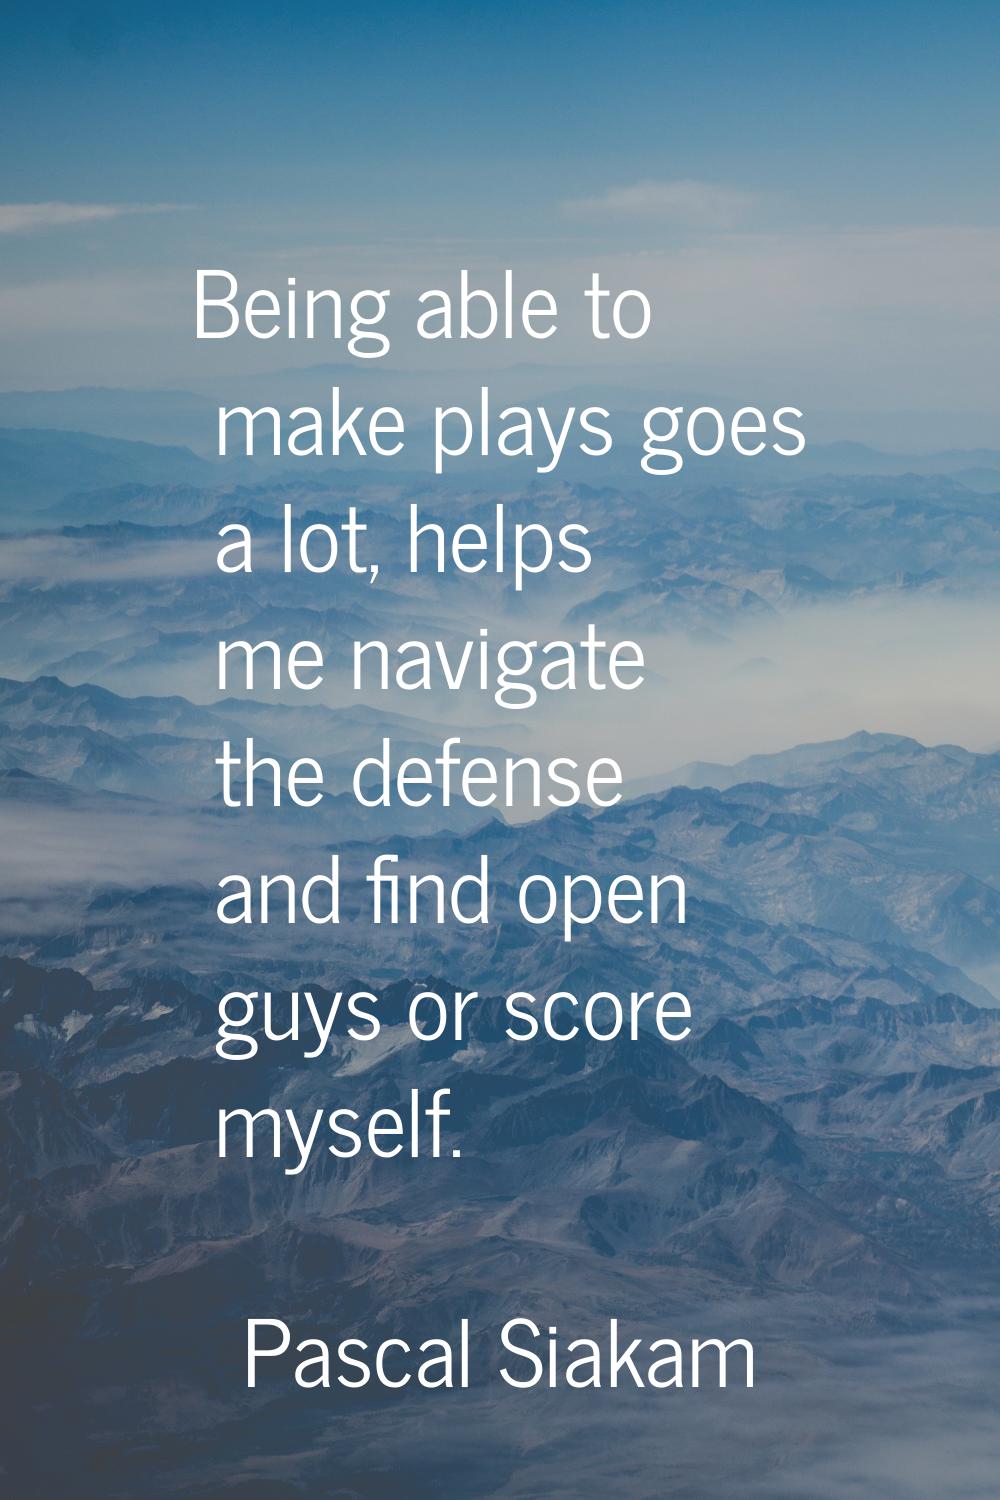 Being able to make plays goes a lot, helps me navigate the defense and find open guys or score myse